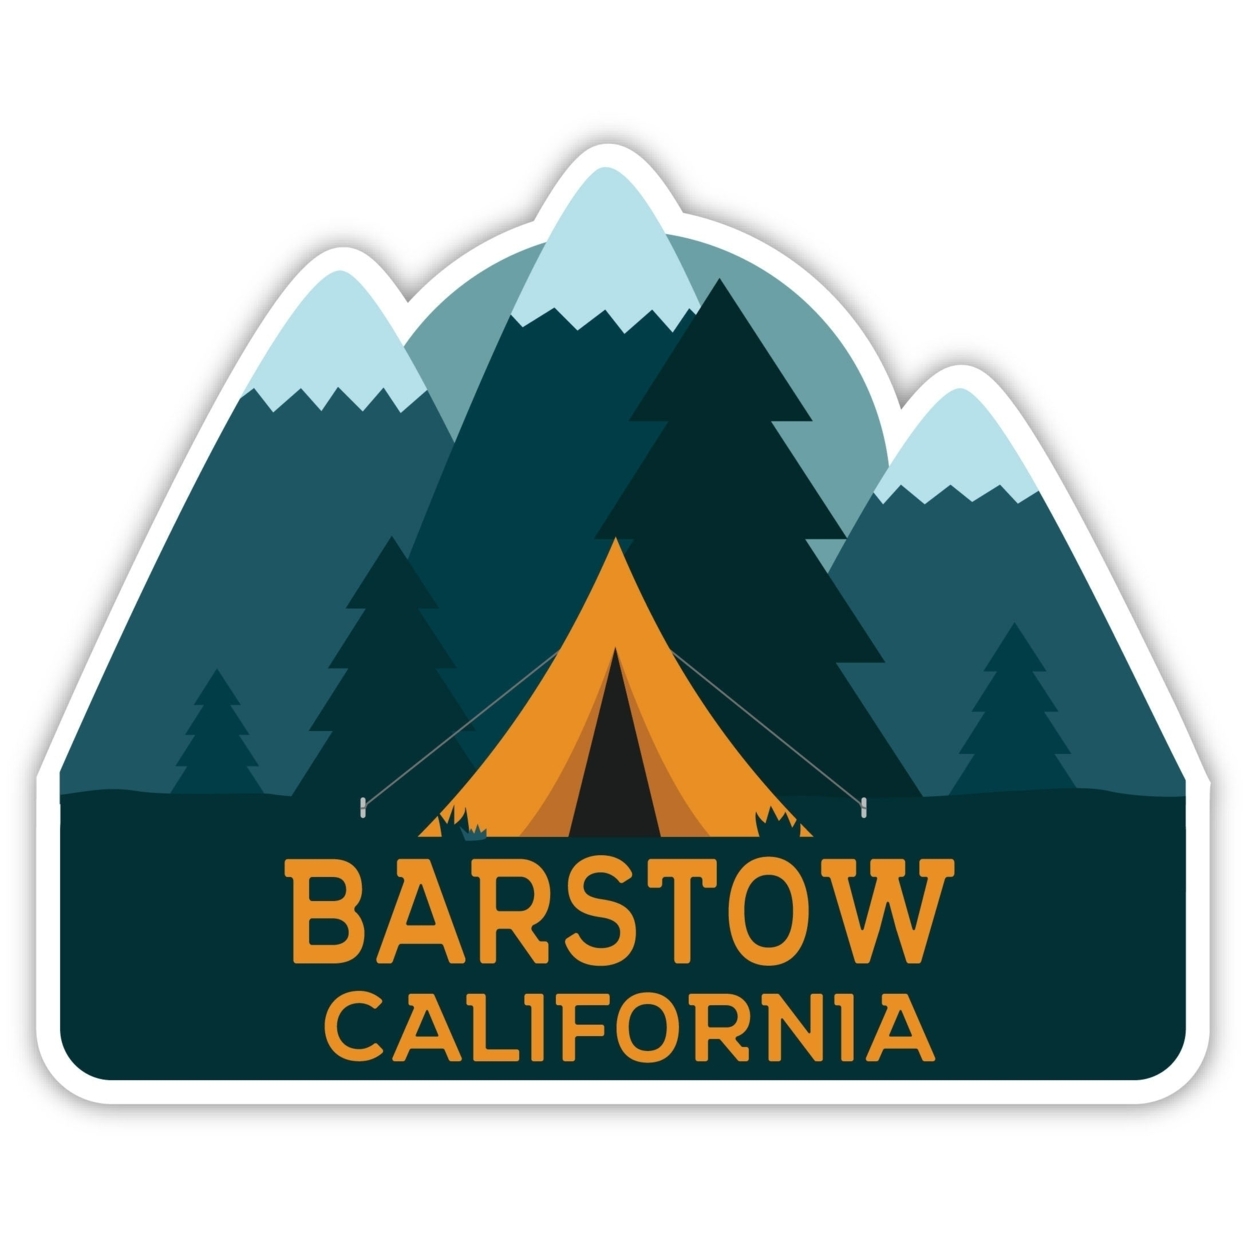 Barstow California Souvenir Decorative Stickers (Choose Theme And Size) - Single Unit, 6-Inch, Camp Life